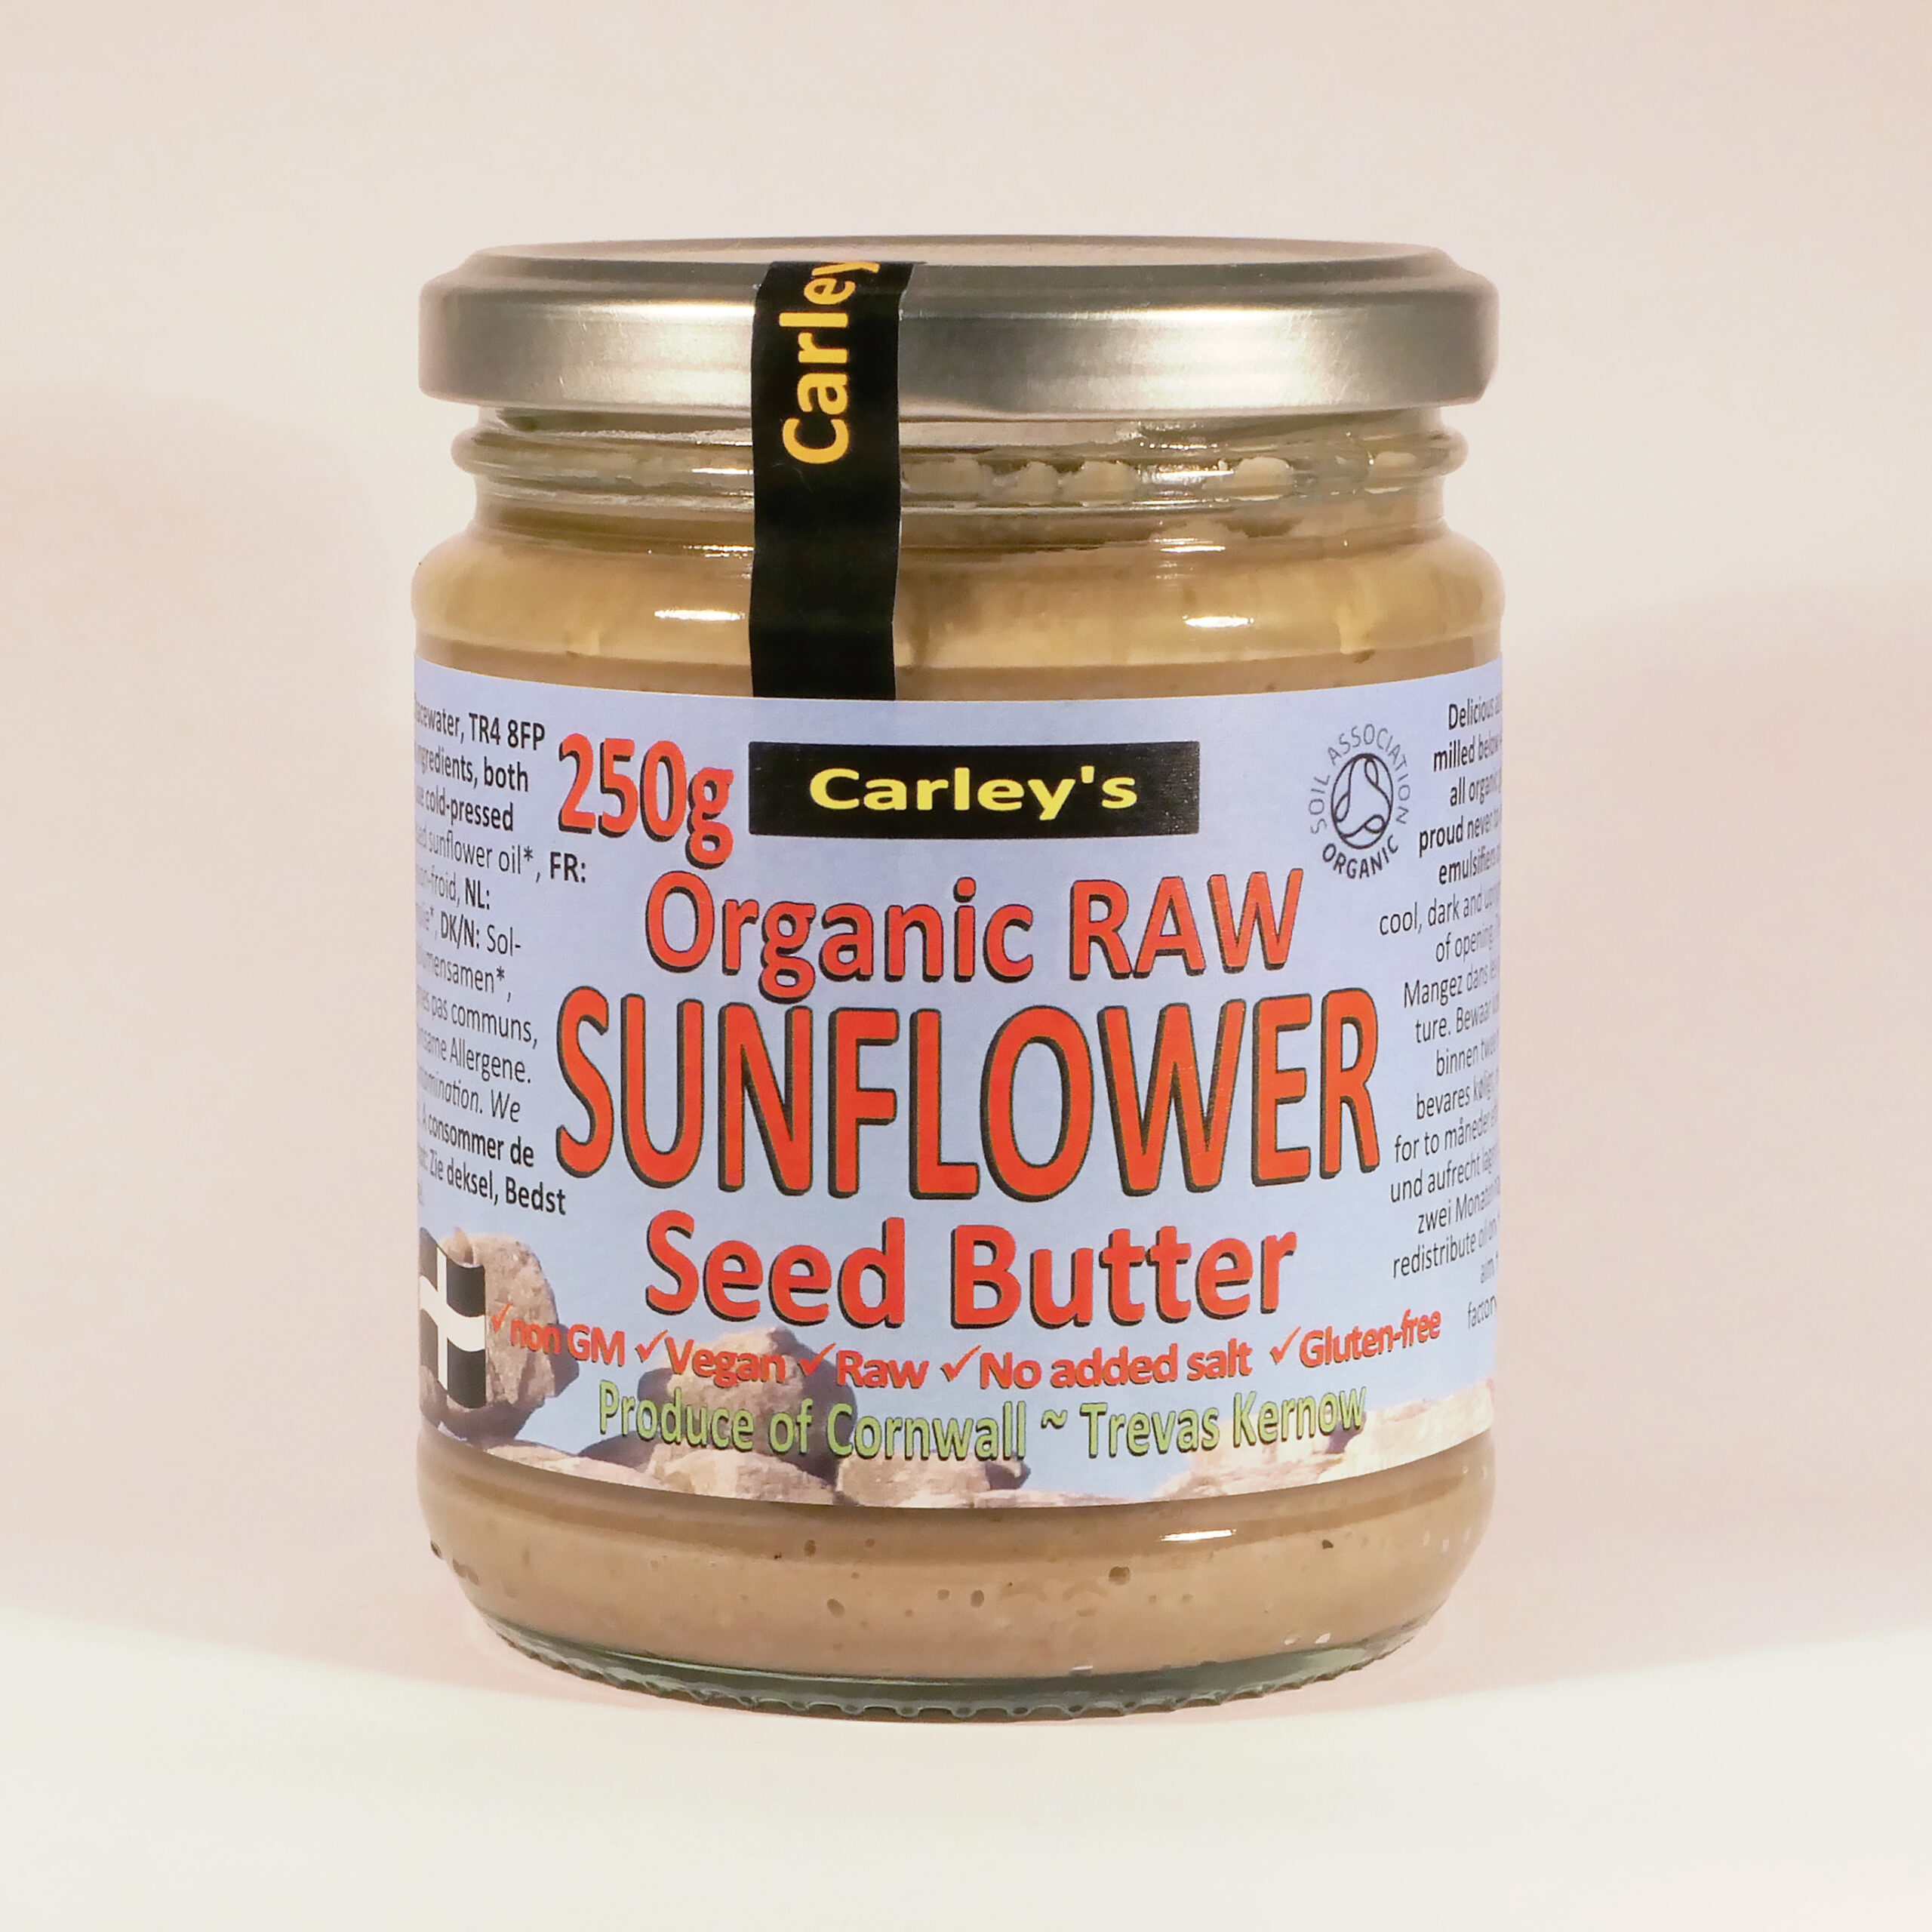 Carley’s Organic Sunflower Roasted Seed Butter